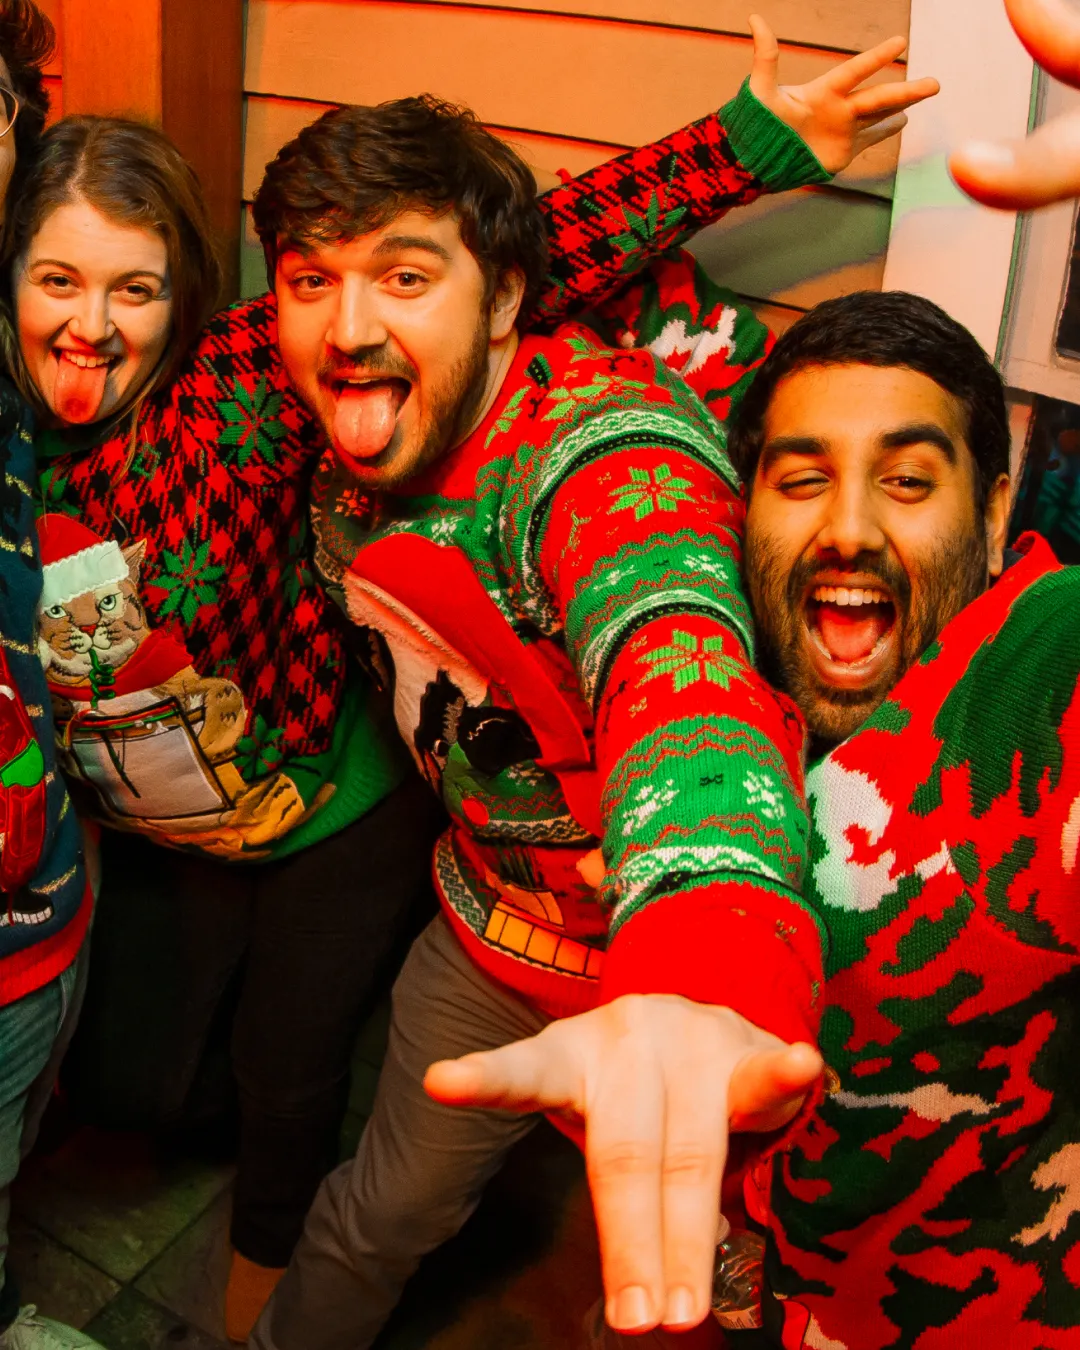 Bar crawl participants raising a toast in their wild holiday attire at the Ugly Sweater Bar Crawl